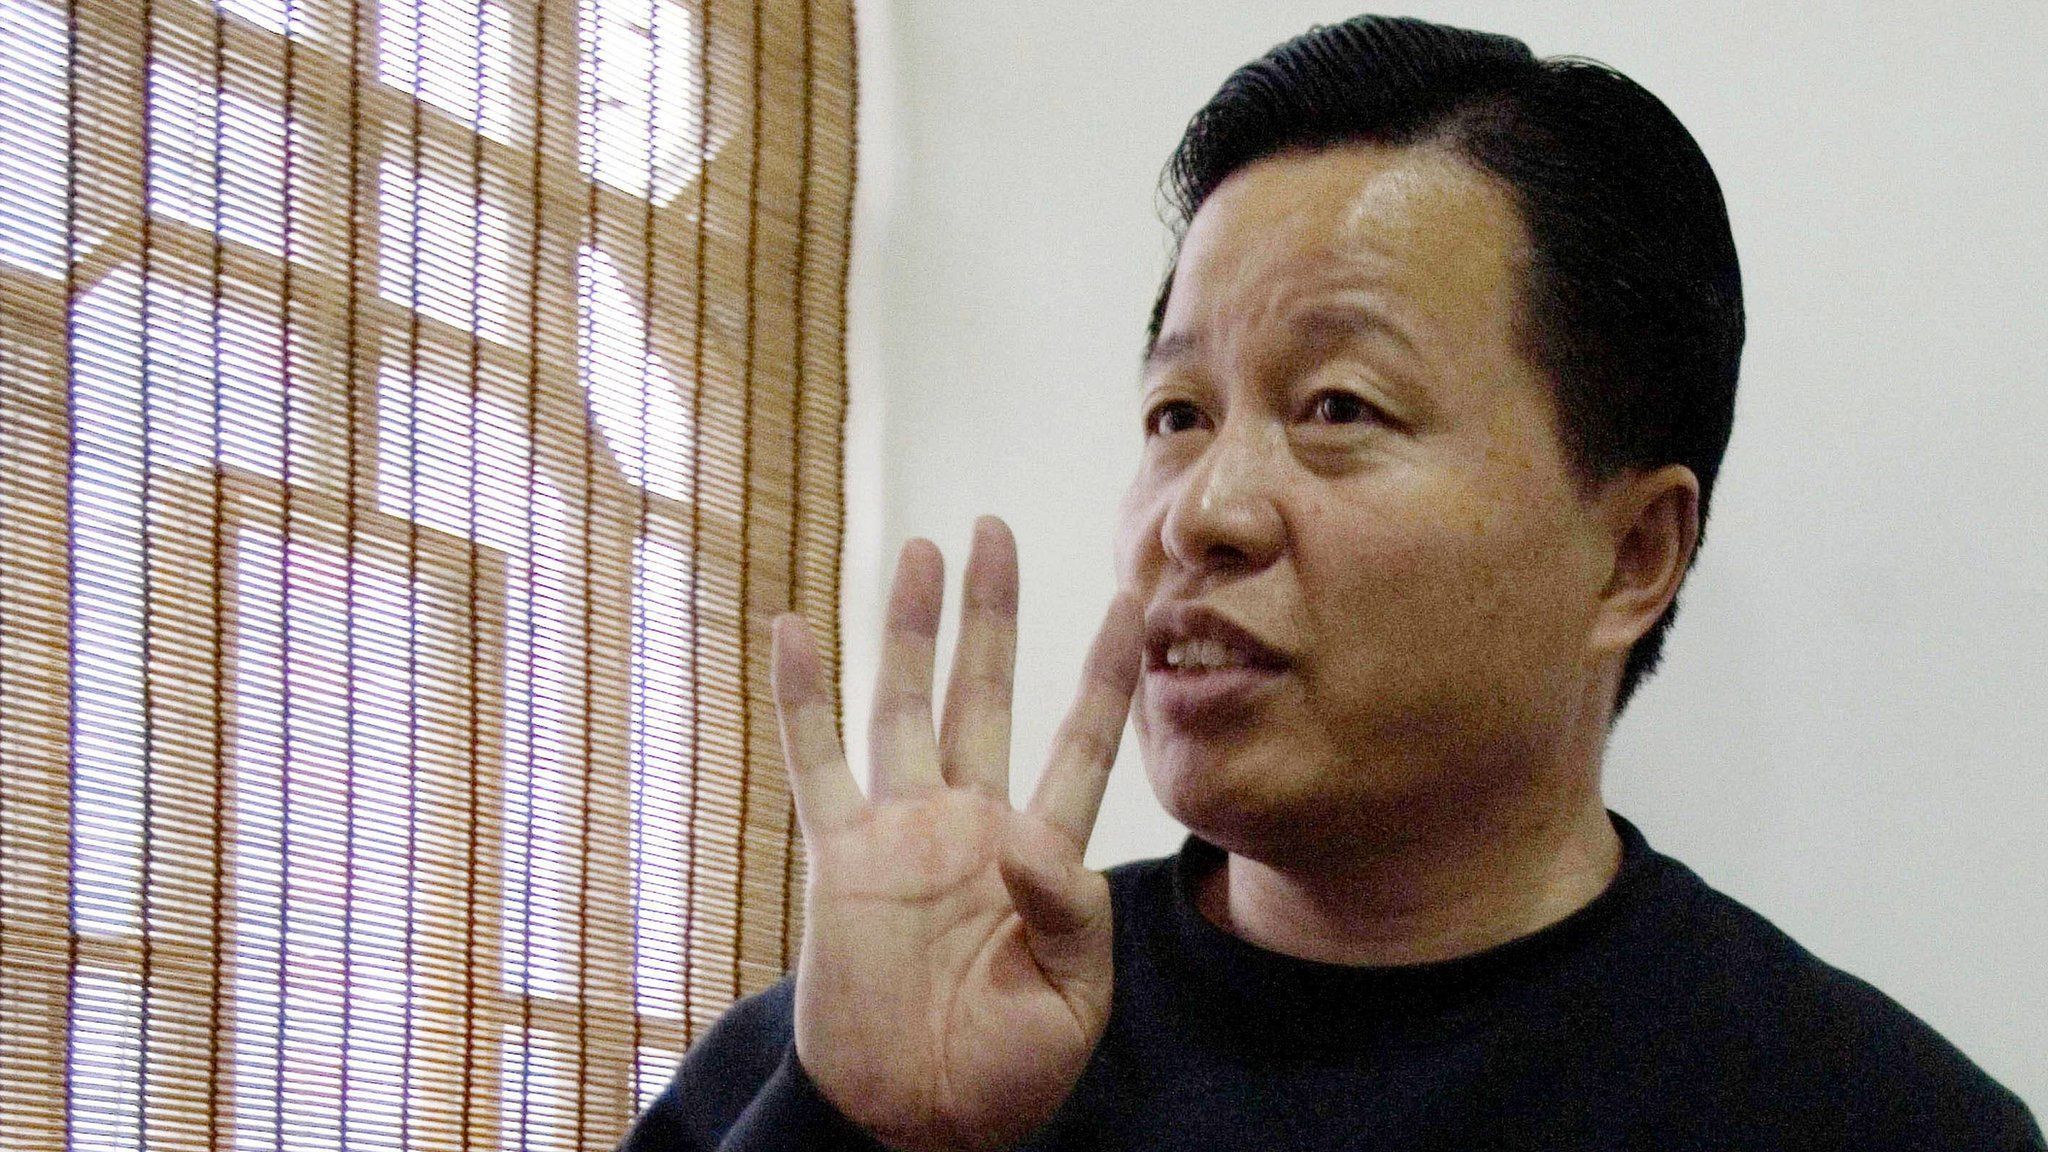 Gao Zhisheng during an interview in 2006